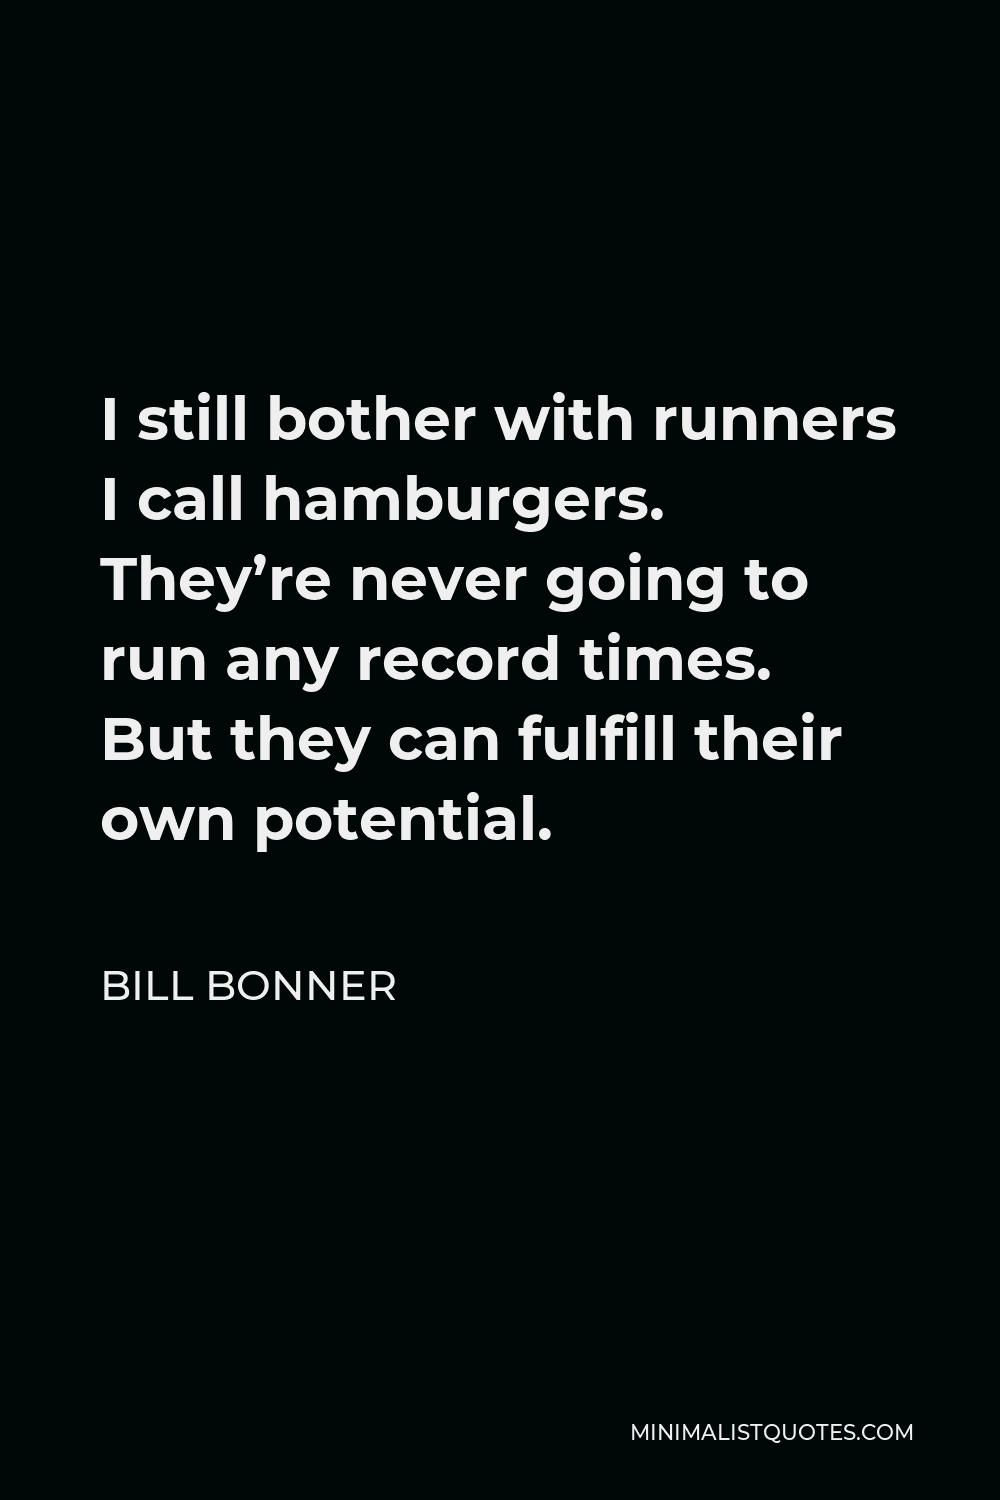 Bill Bonner Quote - I still bother with runners I call hamburgers. They’re never going to run any record times. But they can fulfill their own potential.